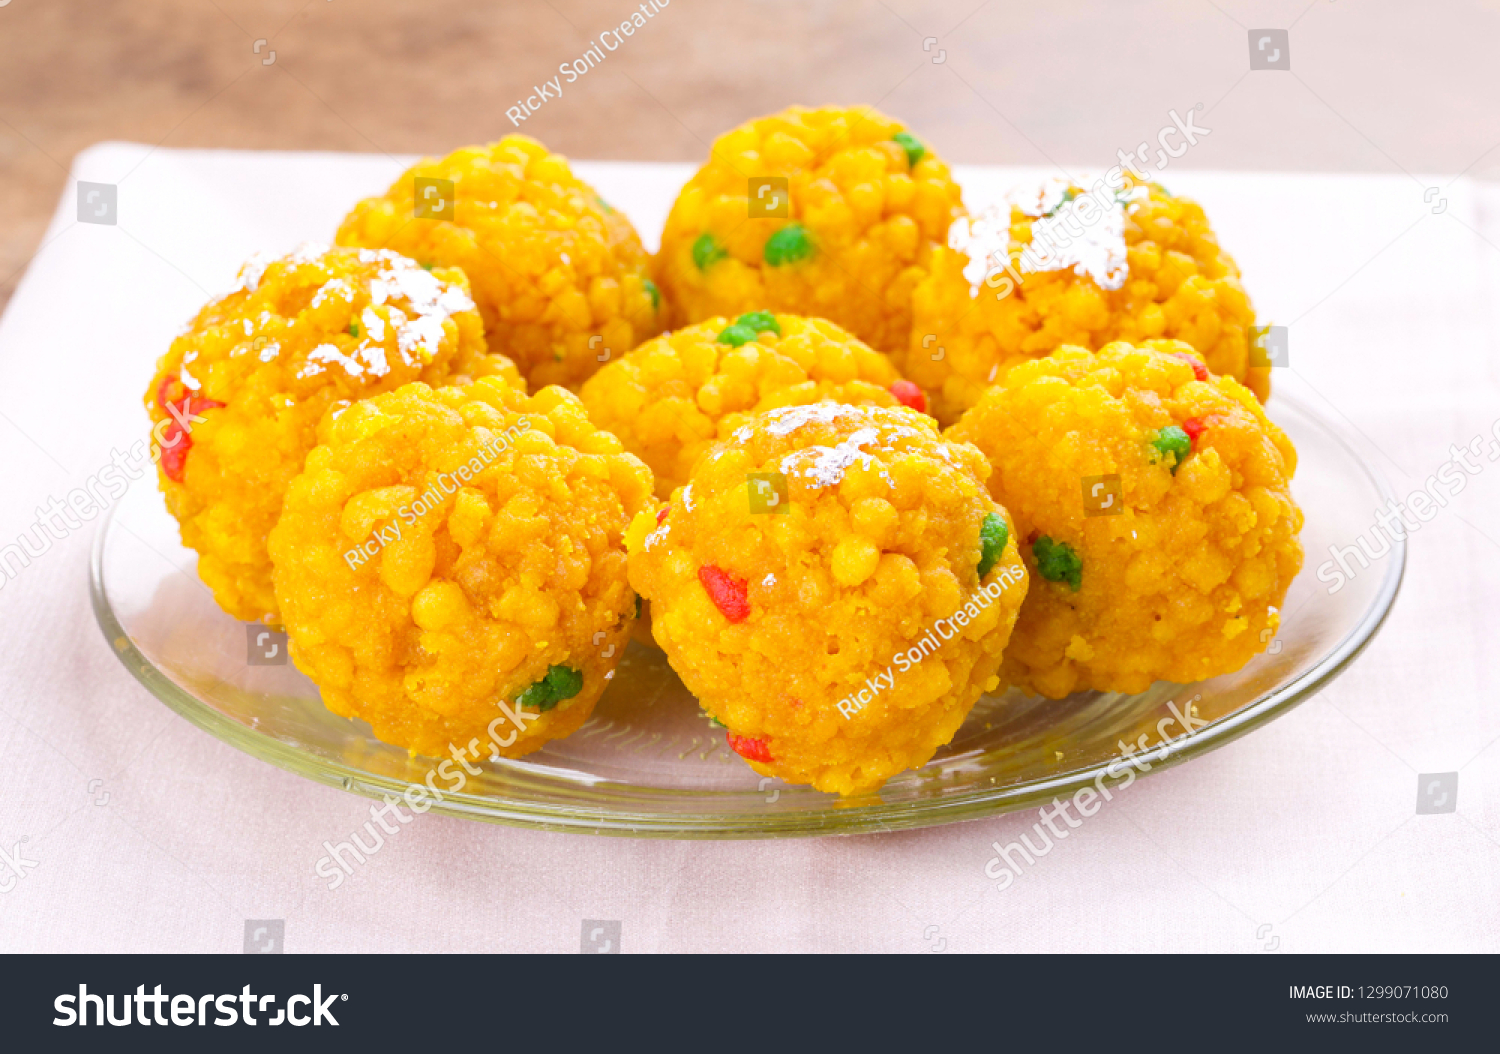 stock-photo-laddu-also-know-as-laddoo-ladoo-laddo-are-ball-shaped-sweets-popular-in-the-indian...jpg